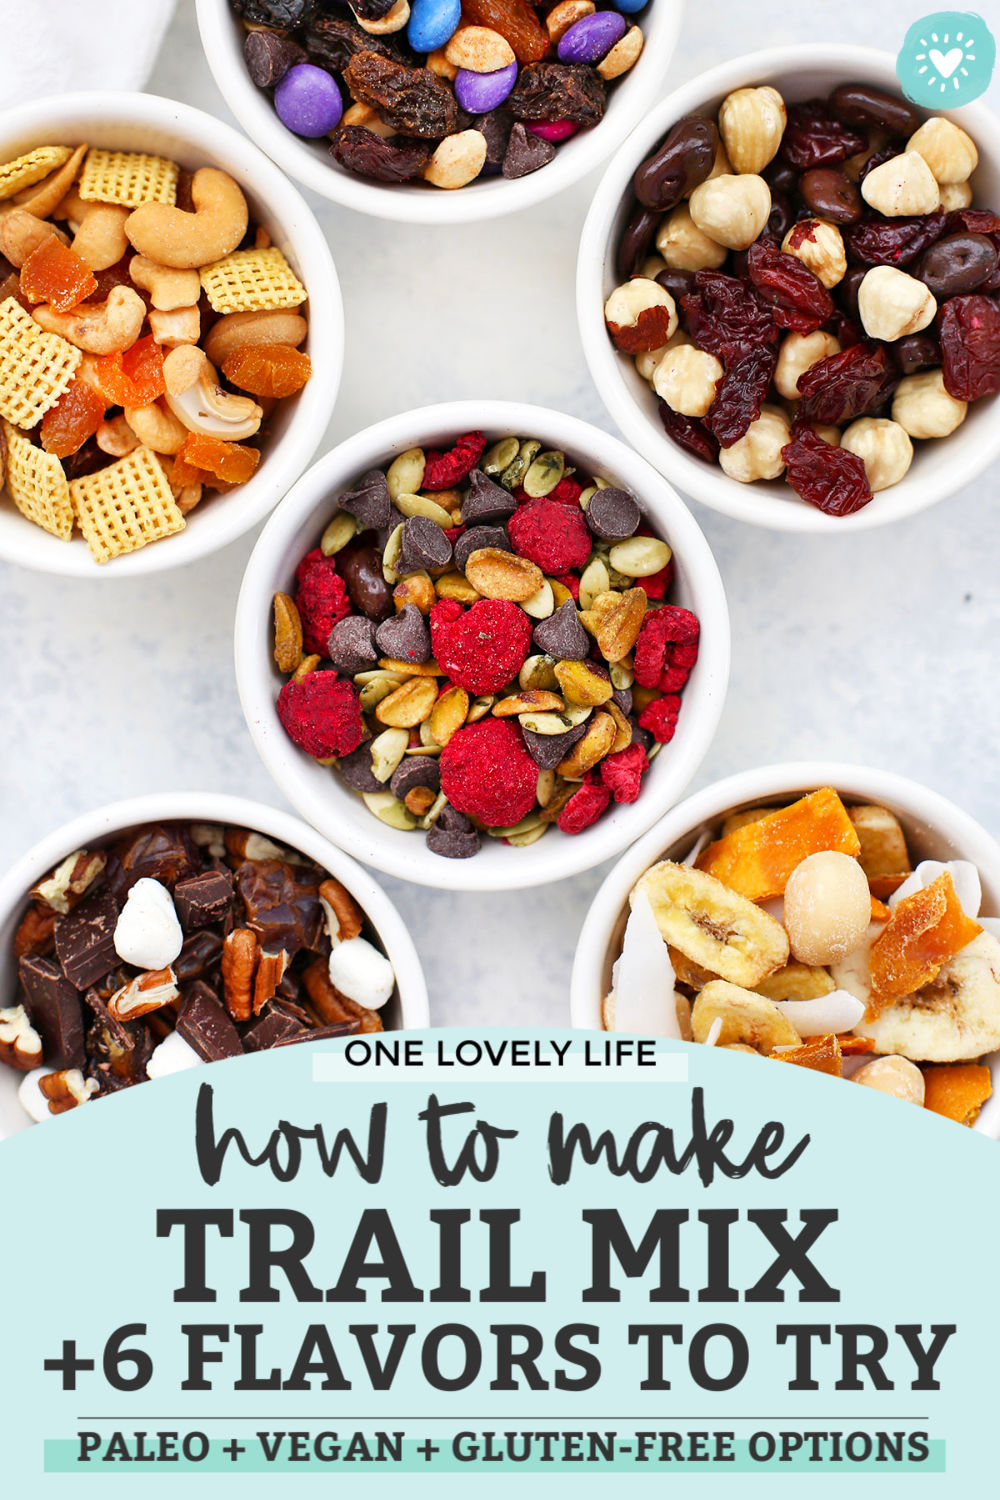 How to Make the BEST Trail Mix - Try this DIY Trail Mix Bar to make a week of healthy snacks in no time with these yummy trail mix ideas! Try our favorite flavor combinations or create your own. Gluten free, vegan, paleo, and Whole30 options! // Paleo snack // Trail Mix // Gluten free snack // Vegan snack #trailmix #glutenfree #vegan #paleo #snack #healthysnack